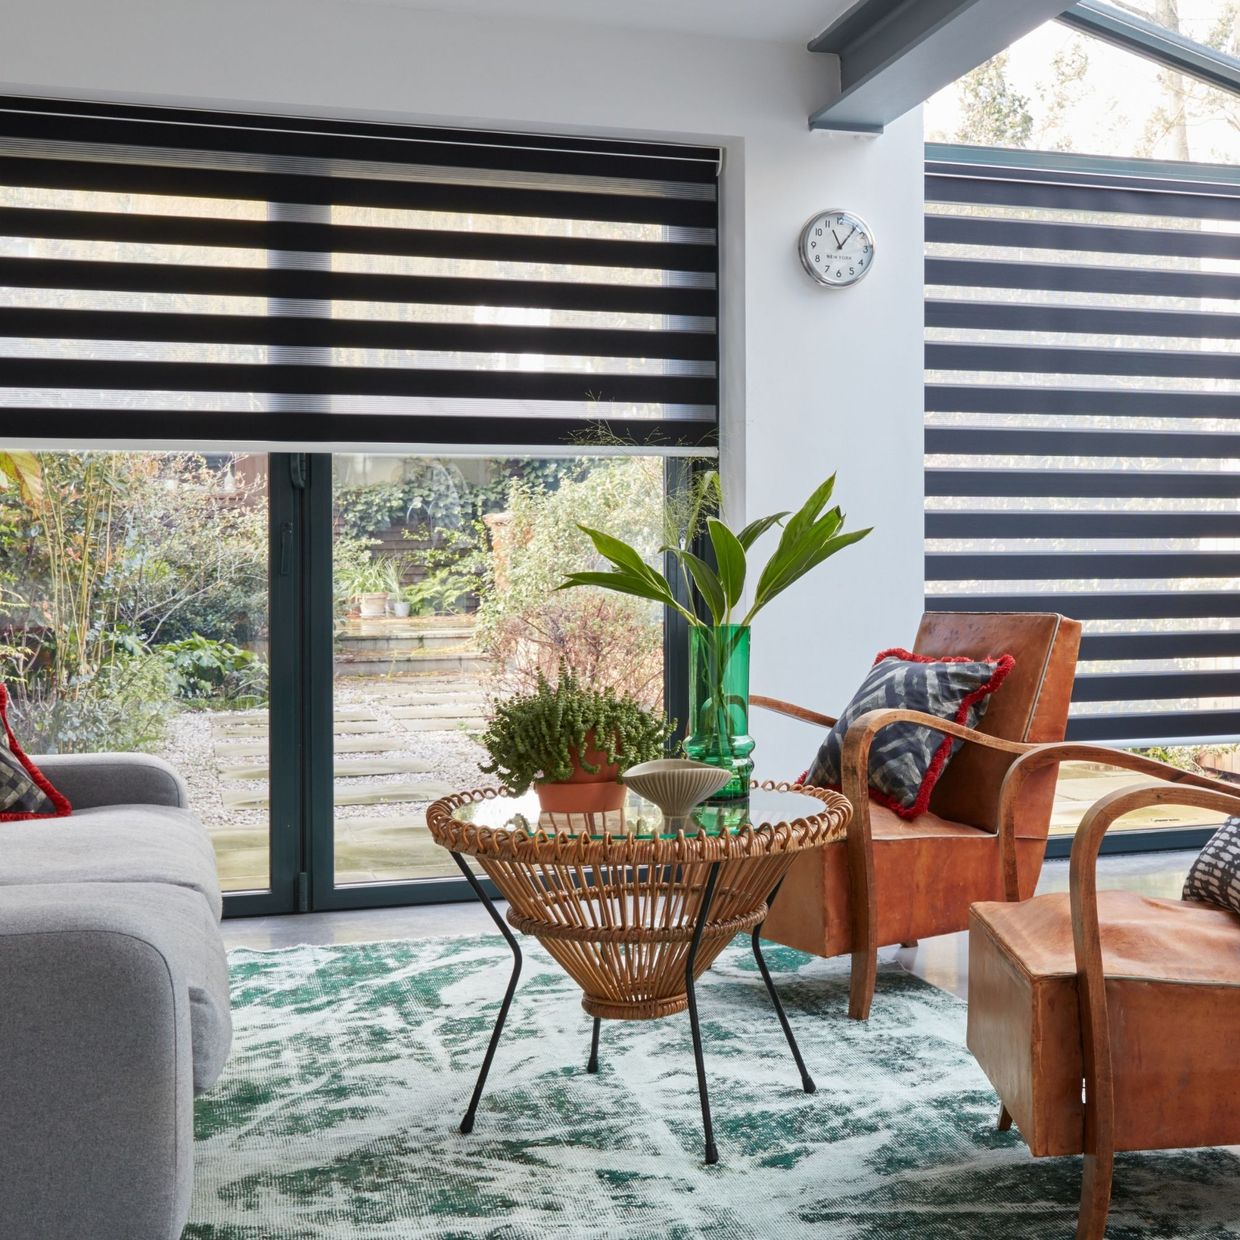 Window Blinds And Shutters Ideas